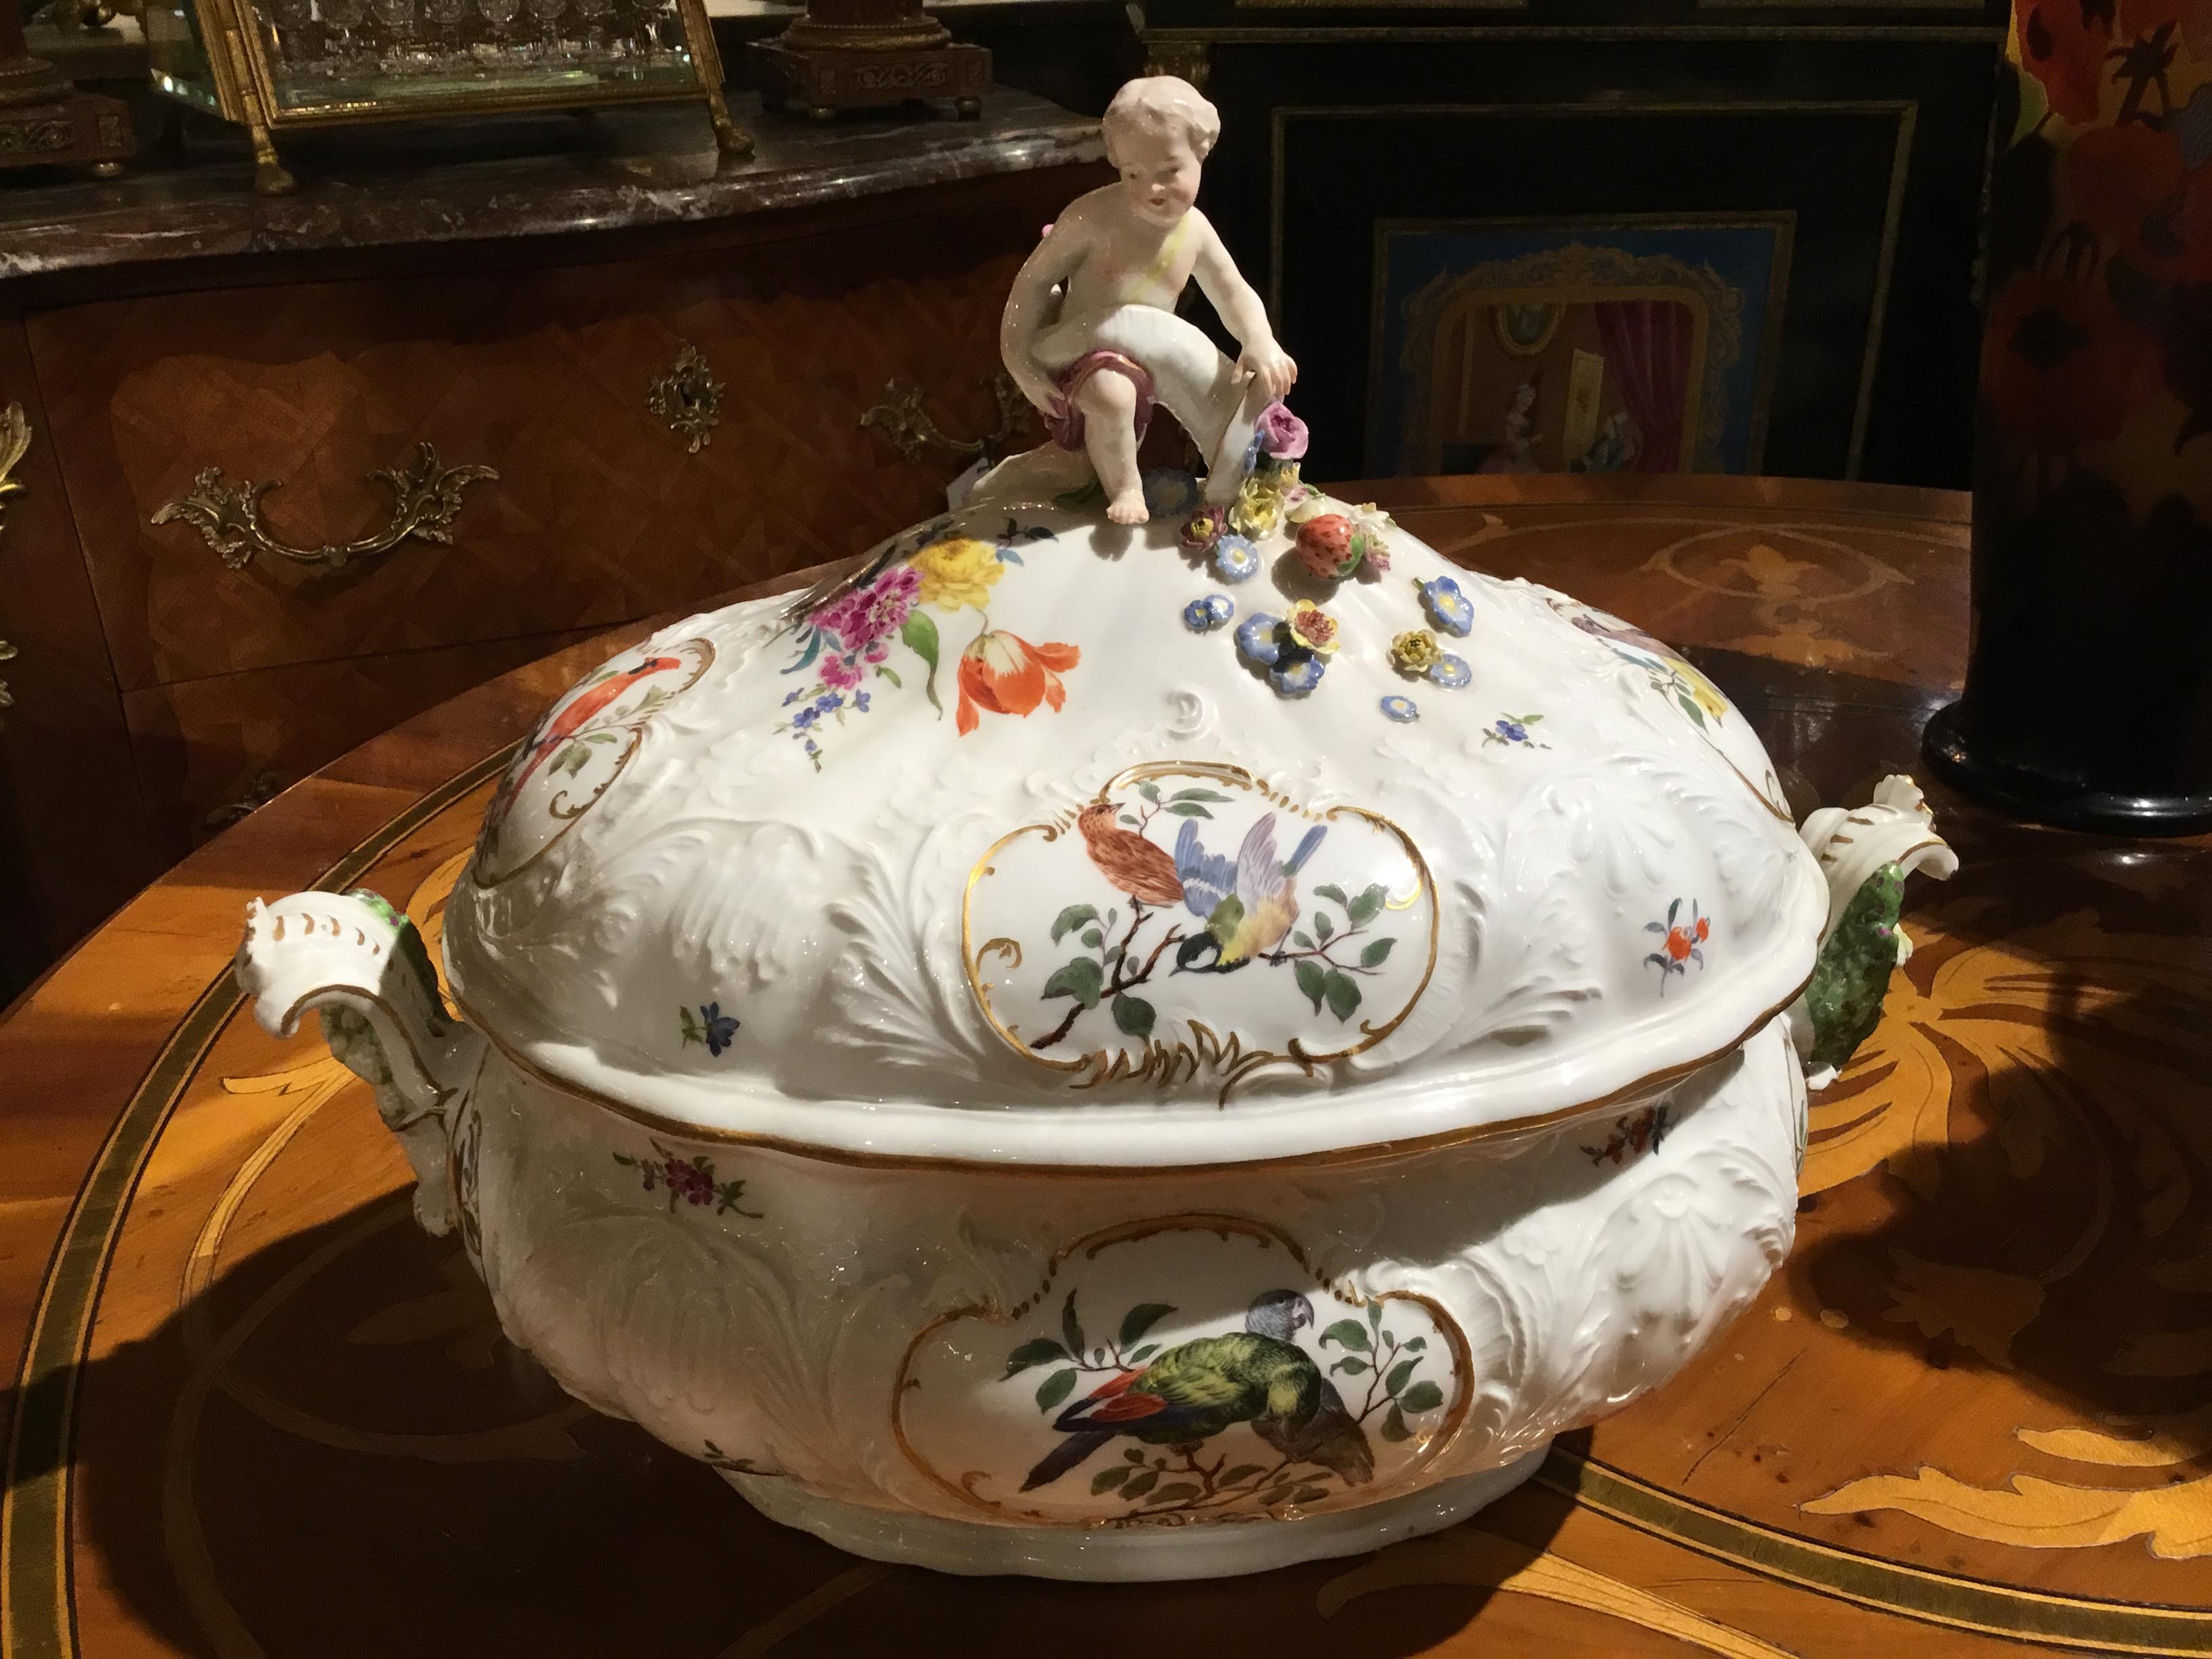 Beautiful and in pristine condition. Very fine quality with a figure of a putto
On the crest holding a cornucopia filled with raised flowers and fruits spilling
Forward on the top of the tureen. Colorful birds are painted in cameos on 
All sides